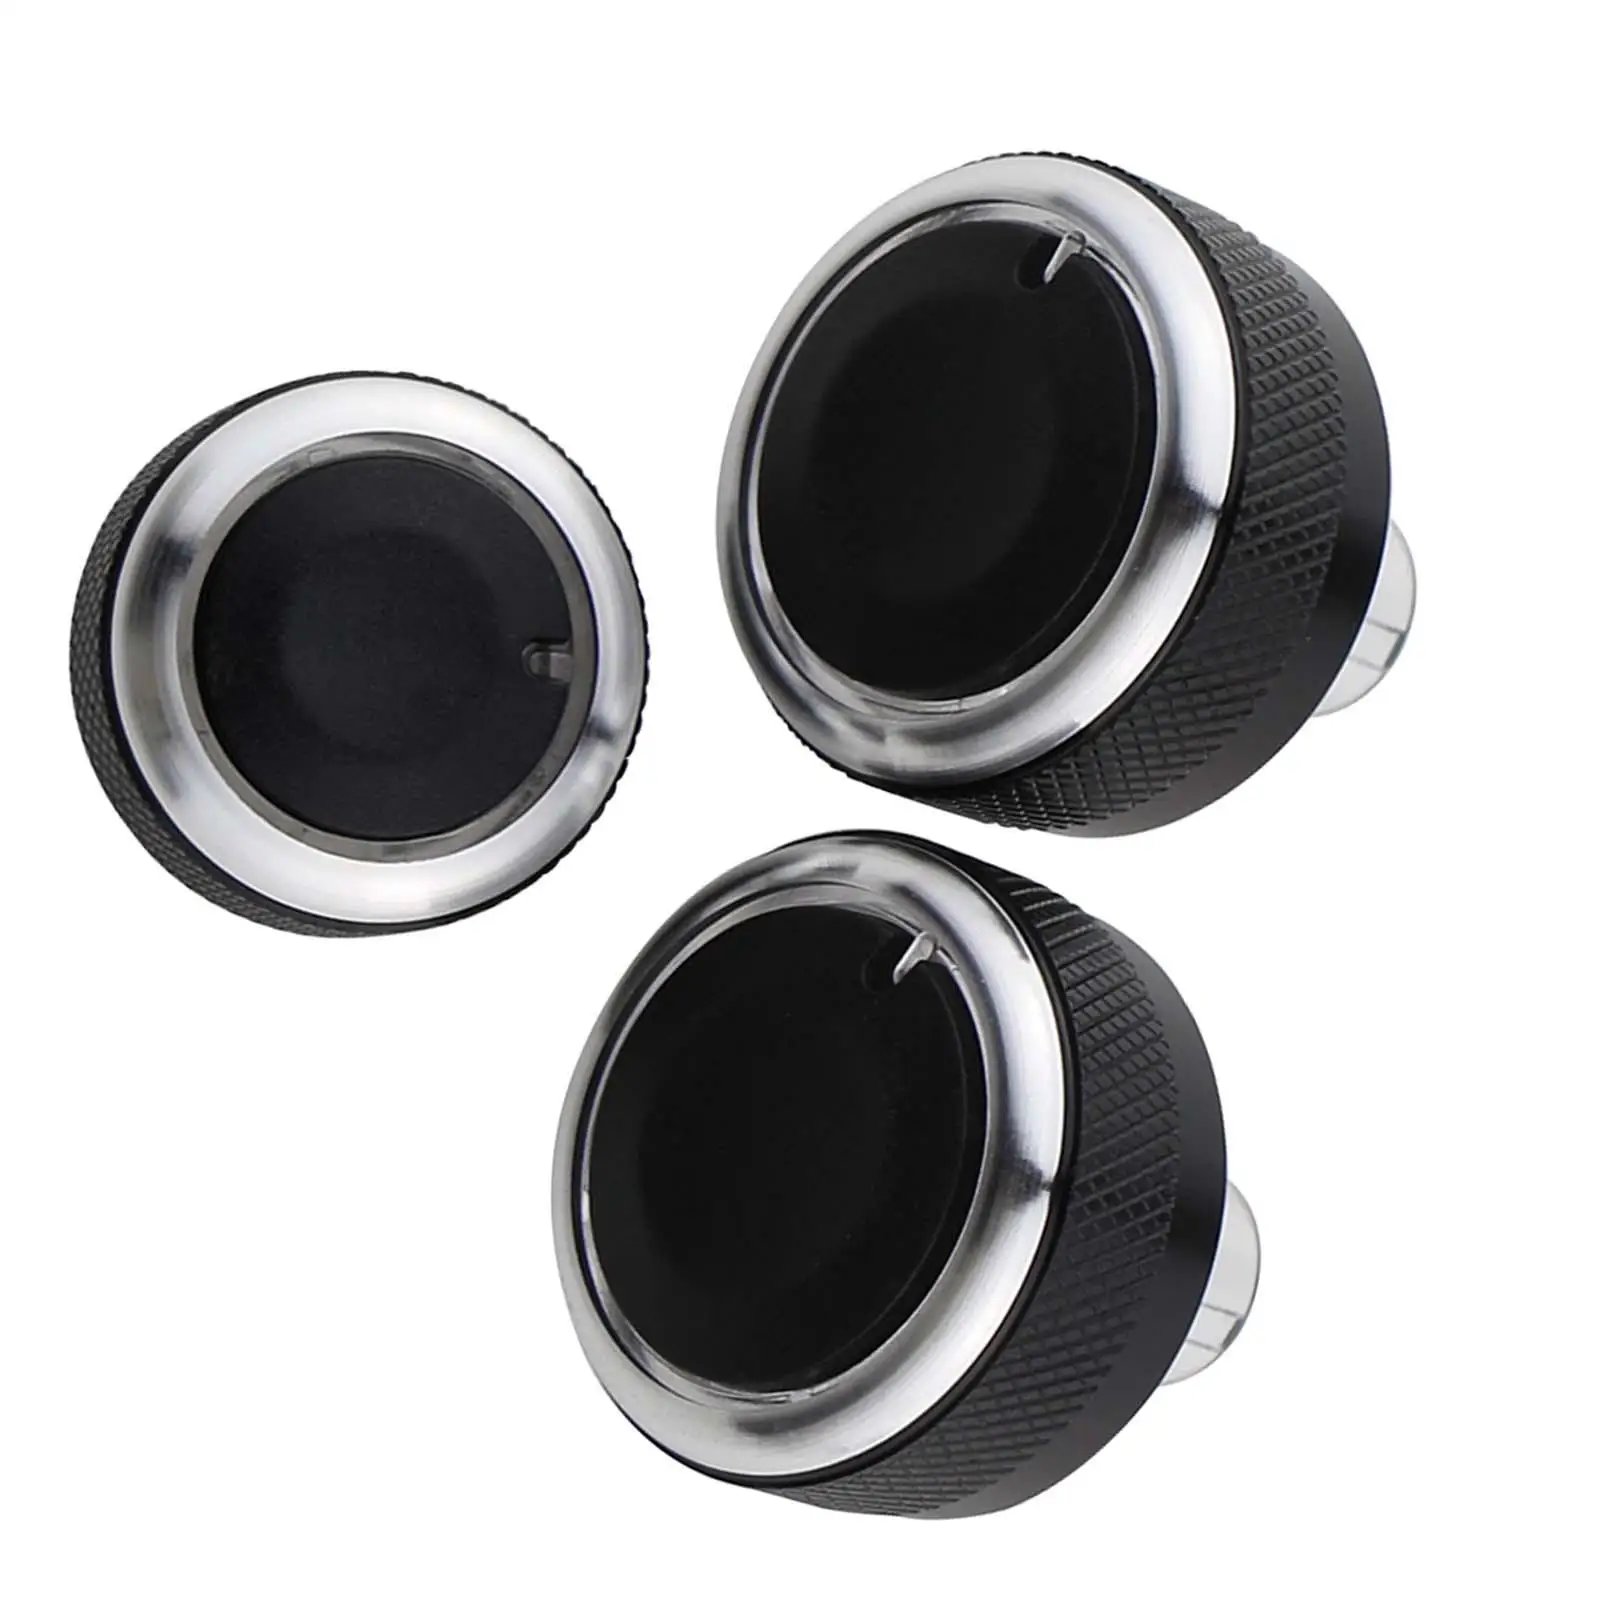 Car Air Conditioner Button Switch, 3 Piece Car Air Conditioner Button Switch, Car Interior Accessories